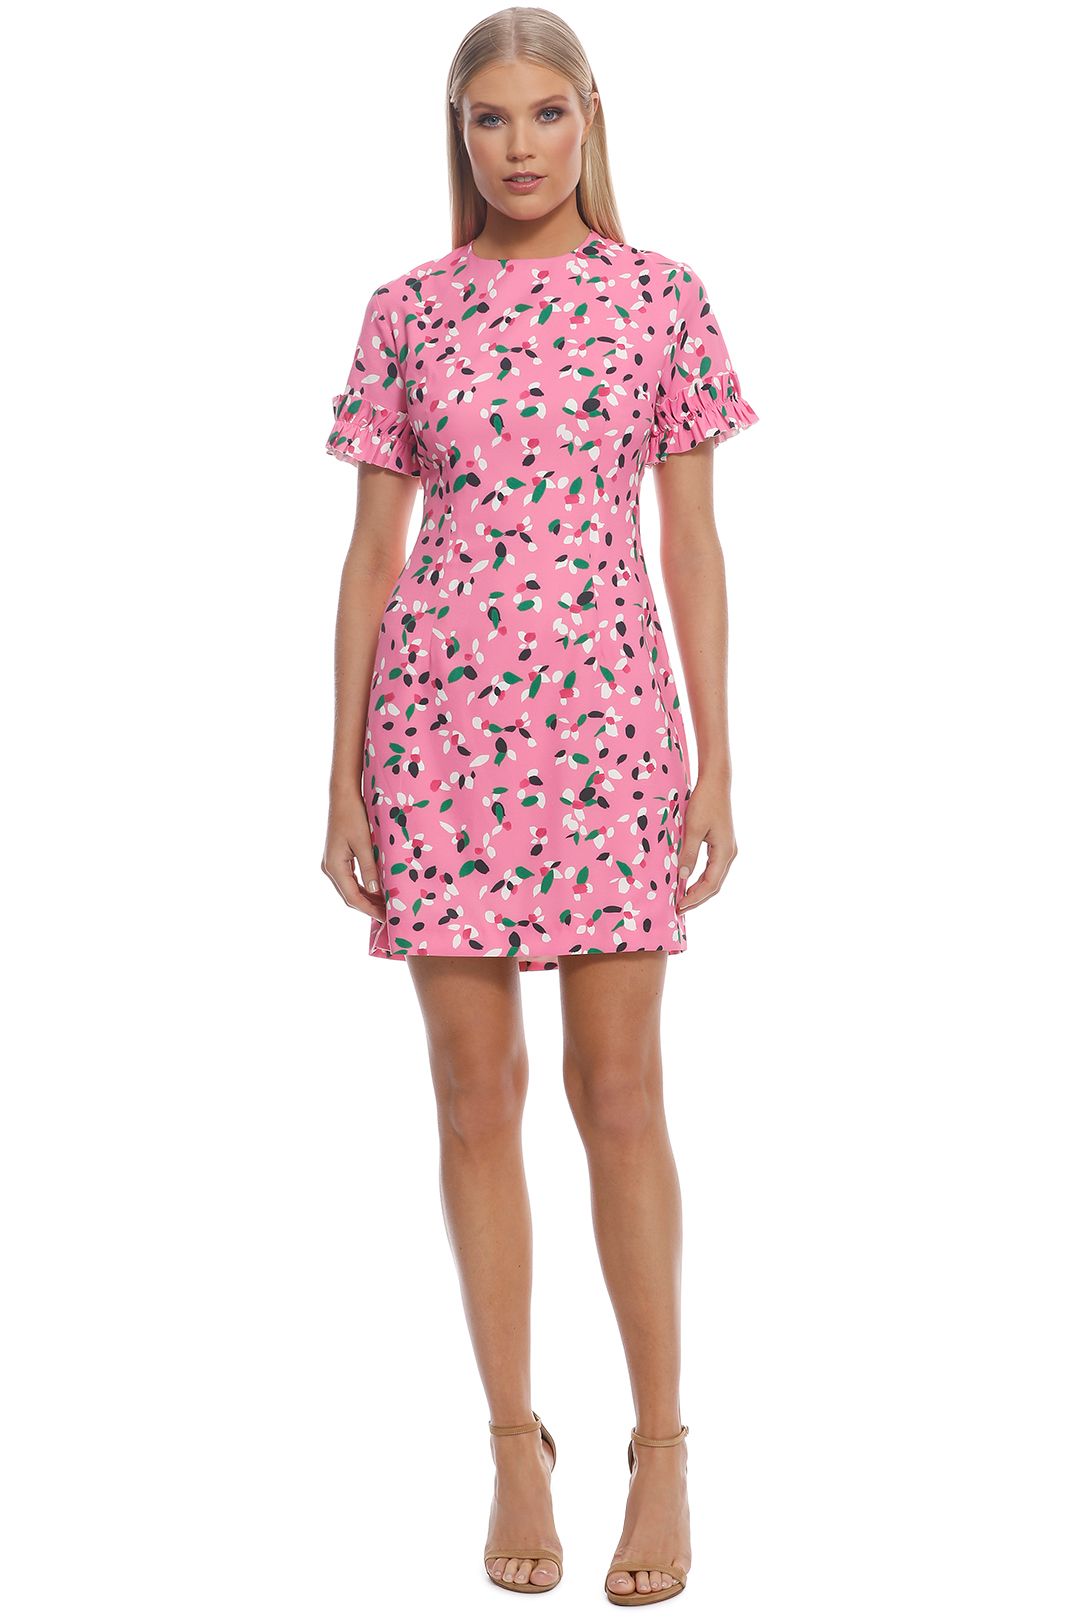 By Johnny - Painted Petal Ruffle Tee Dress - Pink - Front